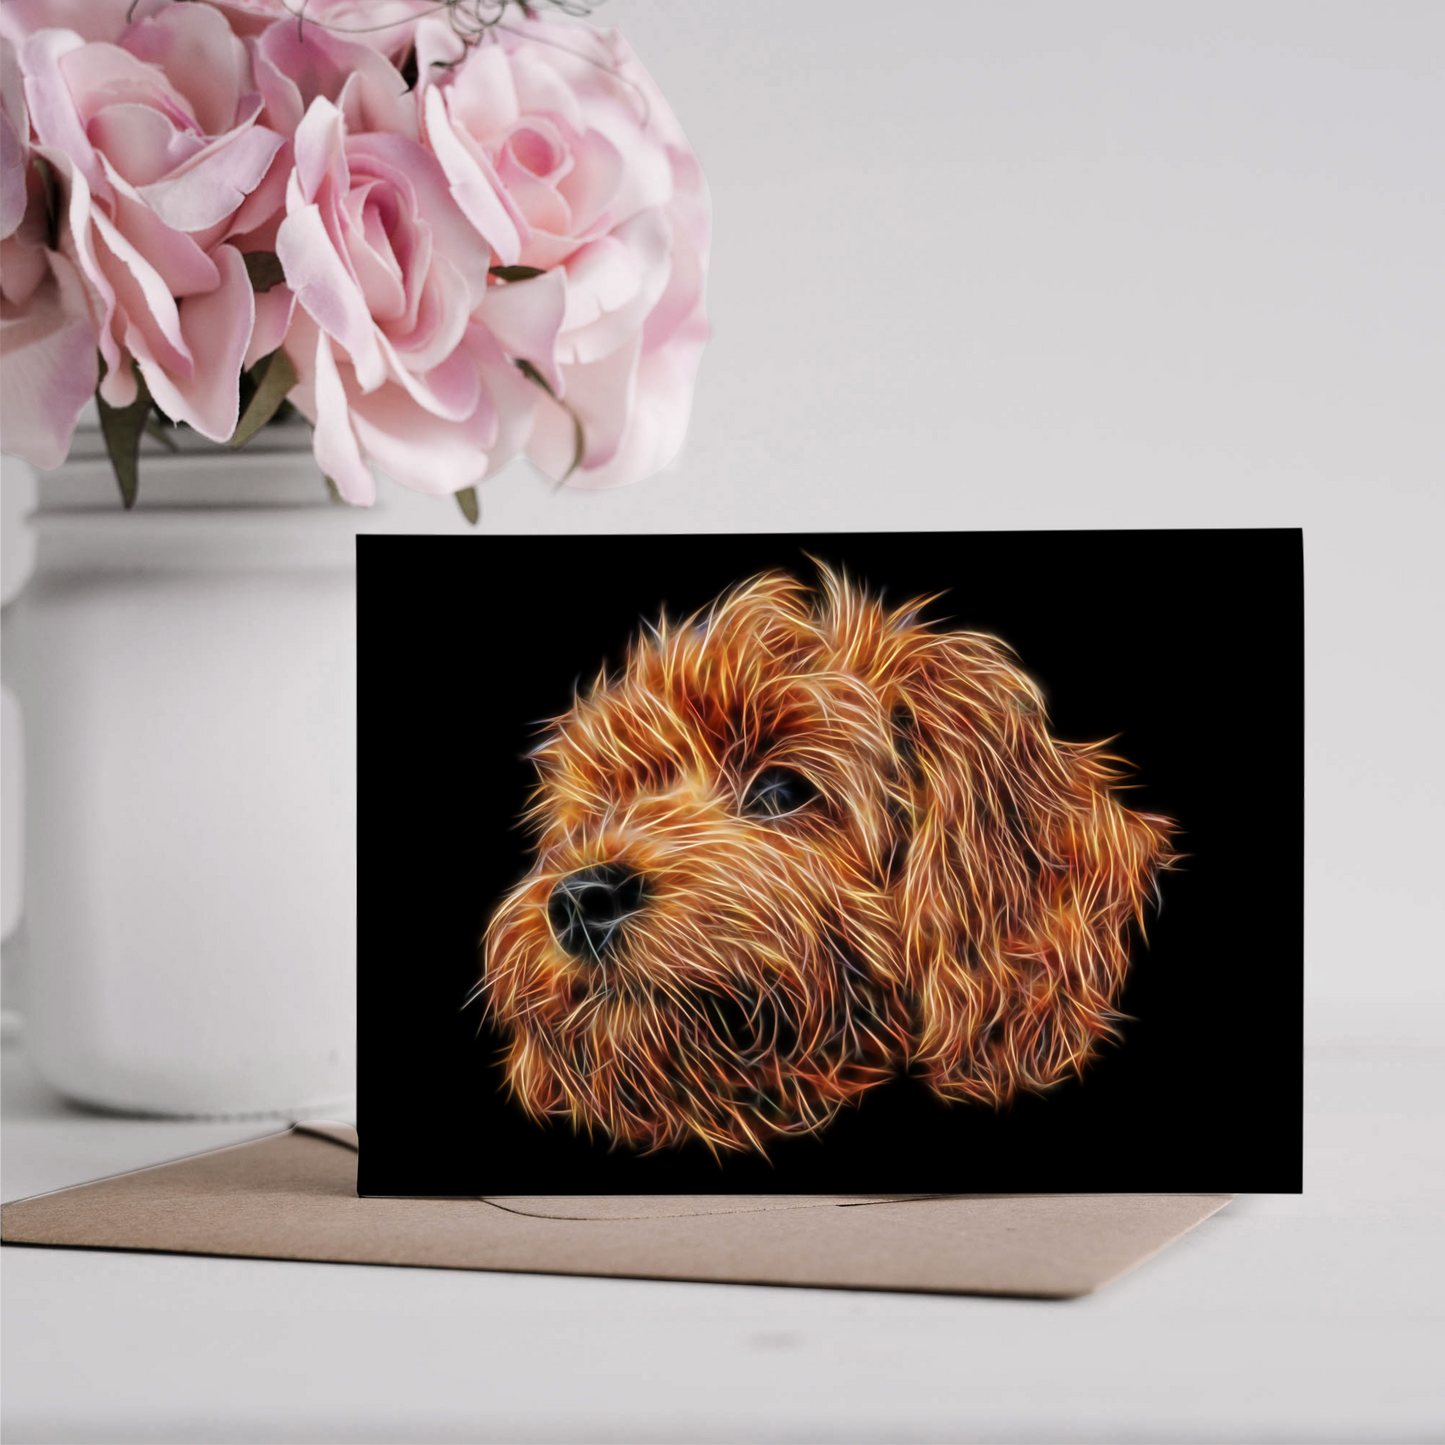 Red Cavapoo Greeting Card Blank Inside for Birthdays or any other Occasion